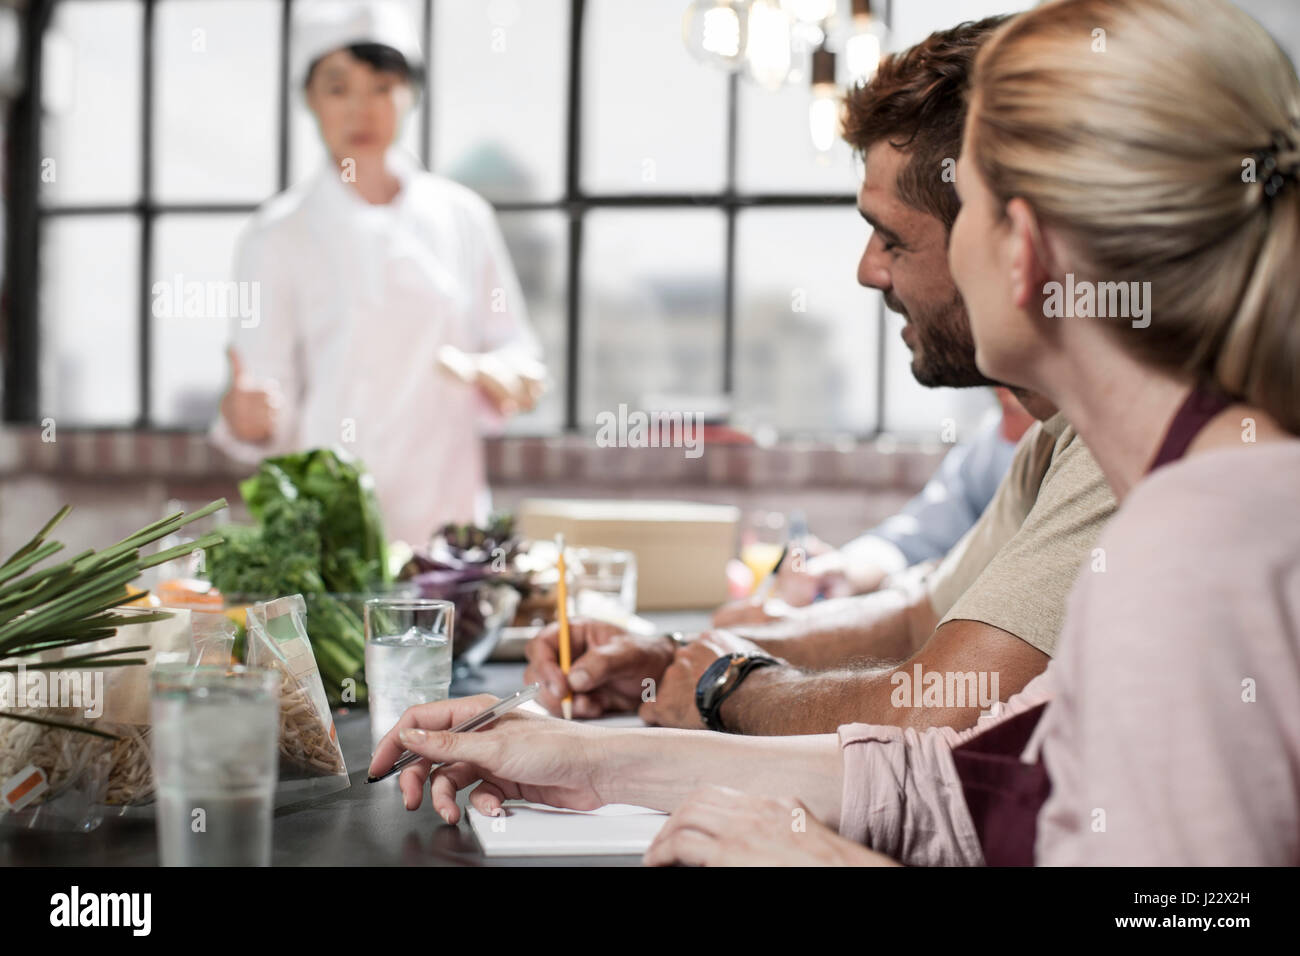 People writing down notes in cooking class Stock Photo